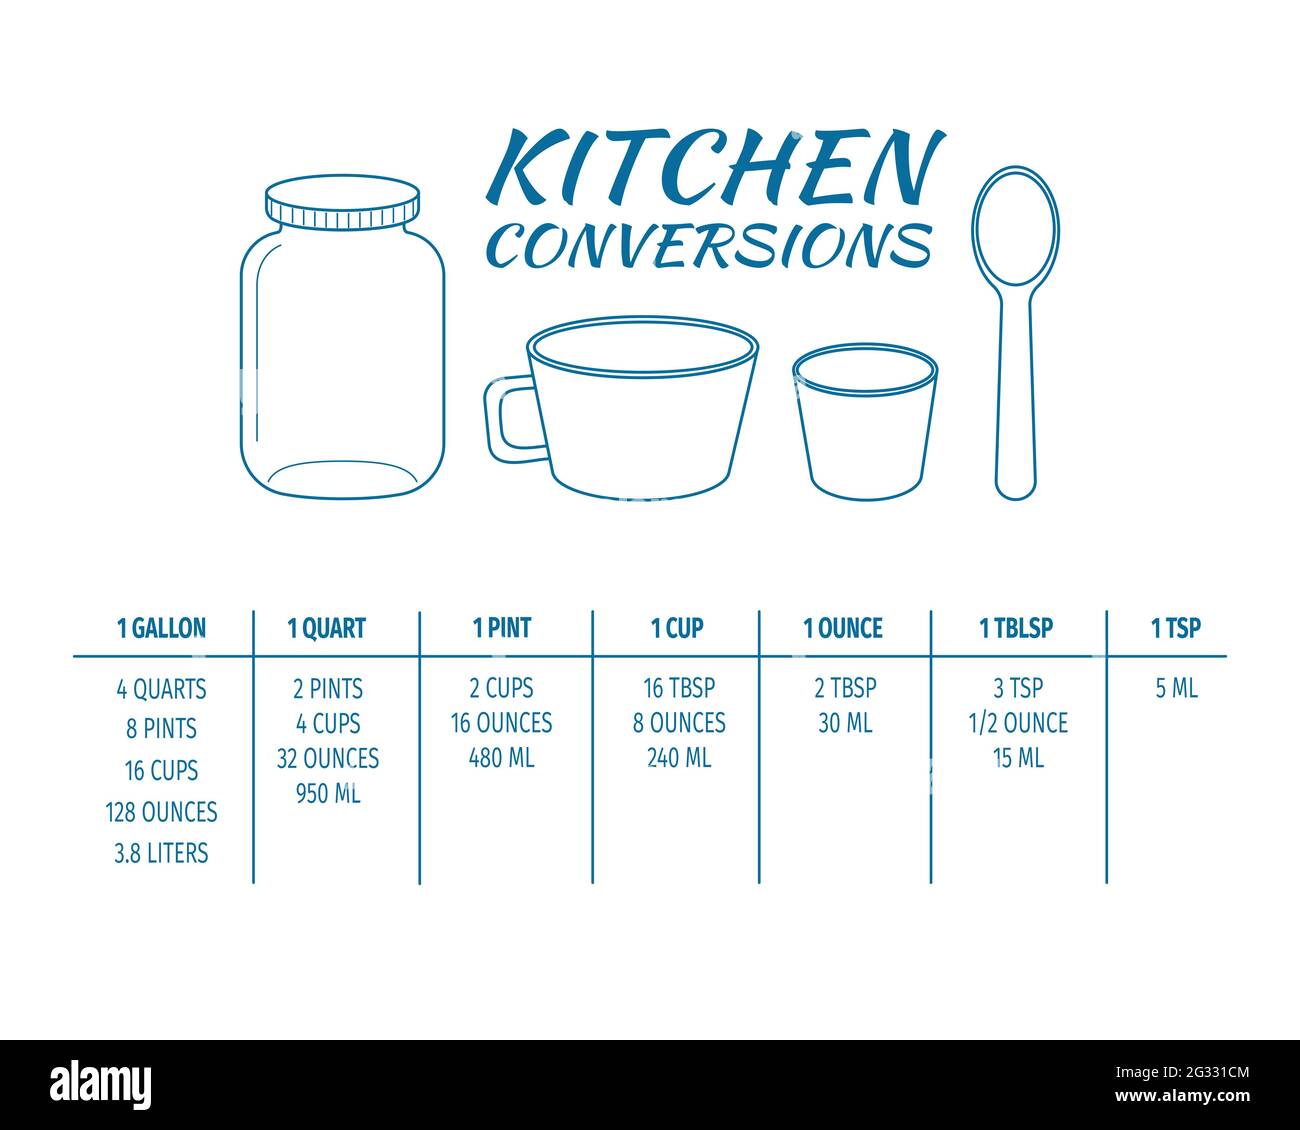 https://c8.alamy.com/comp/2G331CM/kitchen-conversions-chart-table-most-common-metric-units-of-cooking-measurements-volume-measures-weight-of-liquids-and-other-baking-ingredients-vector-outline-illustration-2G331CM.jpg